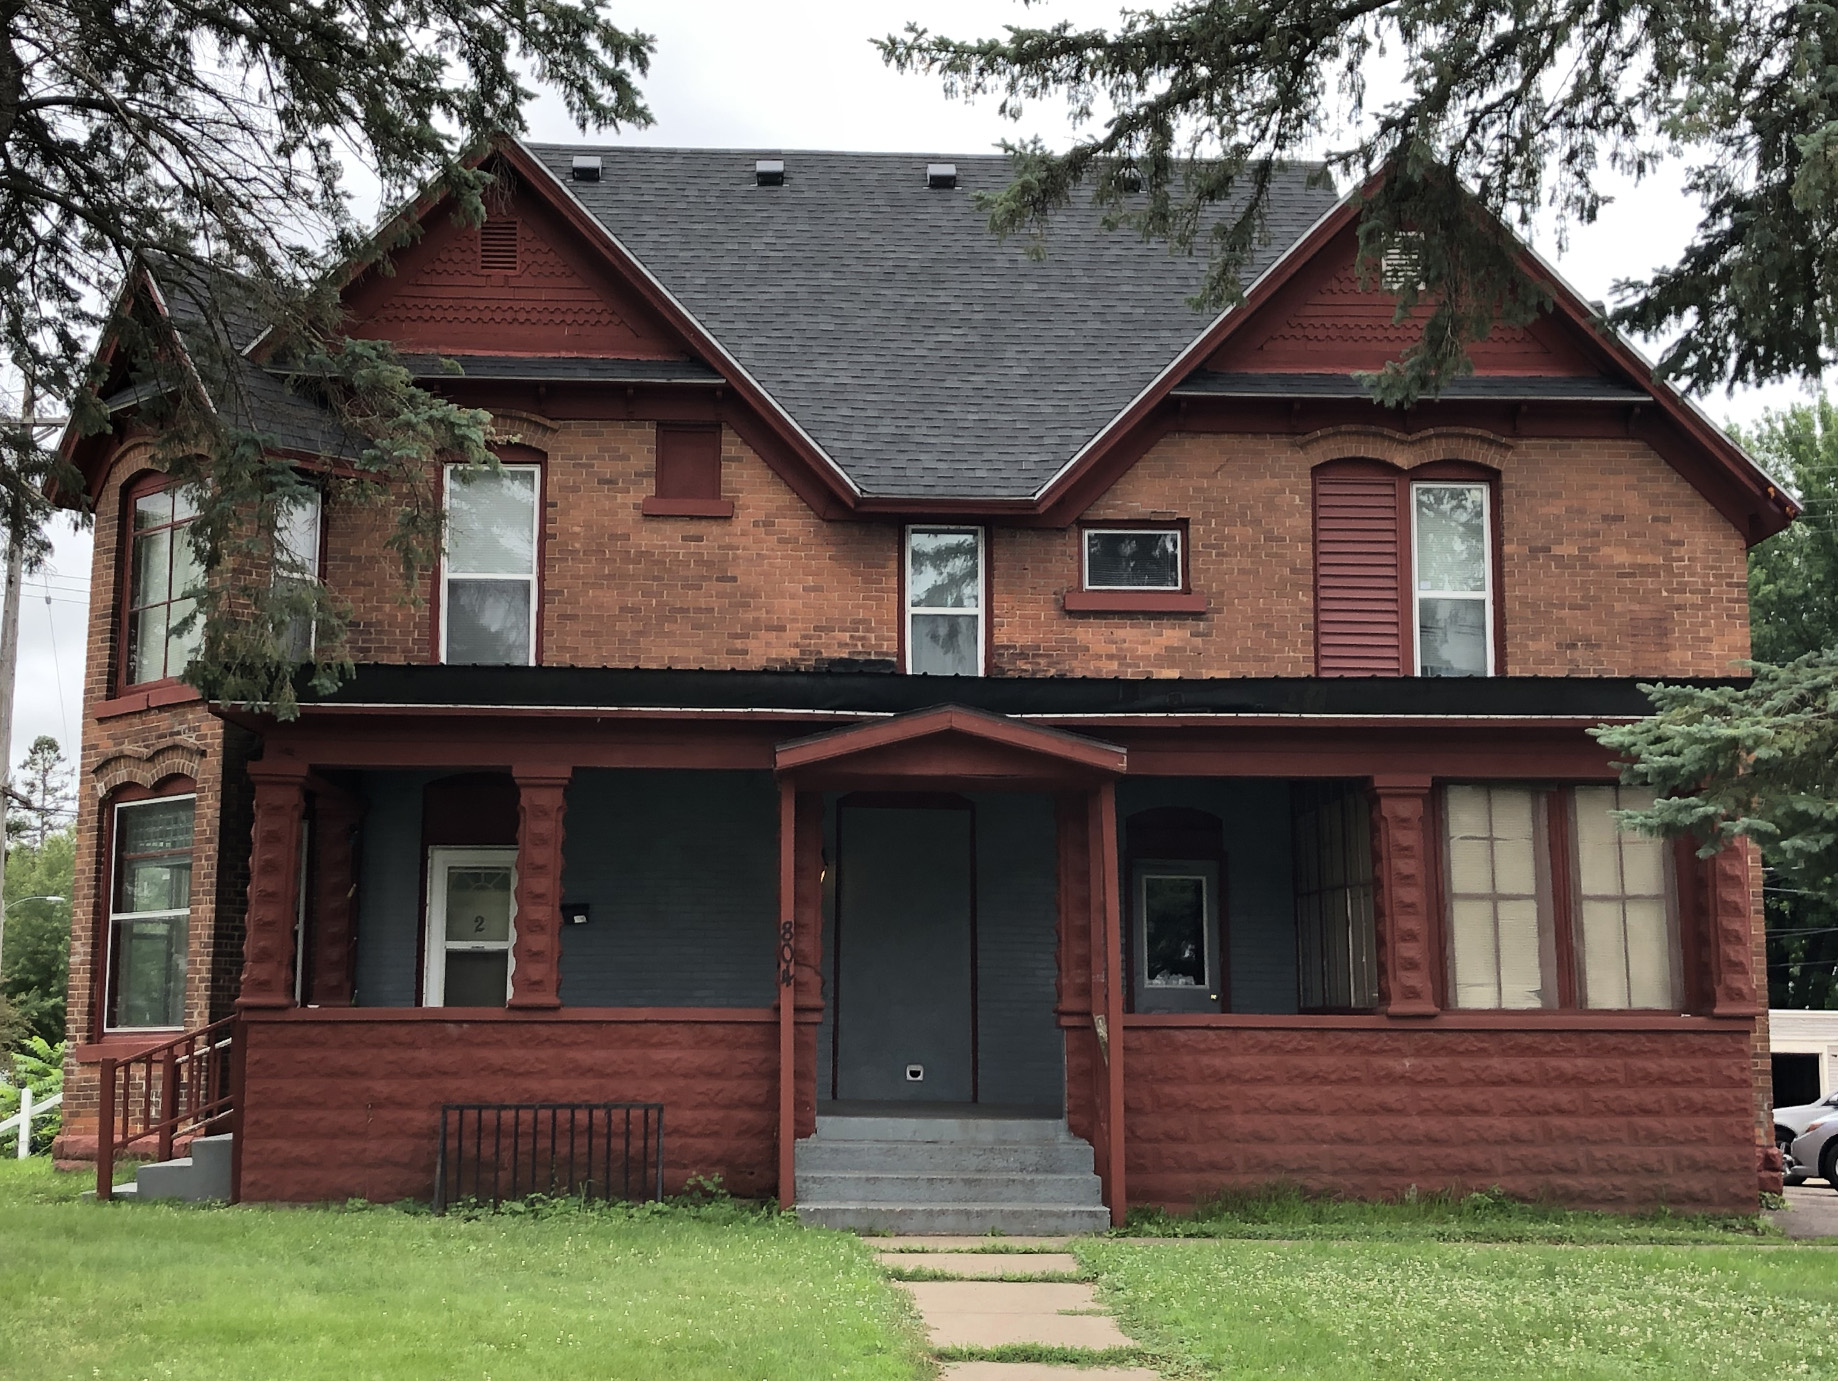 804 5th Ave, Eau Claire, Wisconsin 54703, 2 Bedrooms Bedrooms, ,1 BathroomBathrooms,Multi-Family,Apartment,804 5th Ave,1123